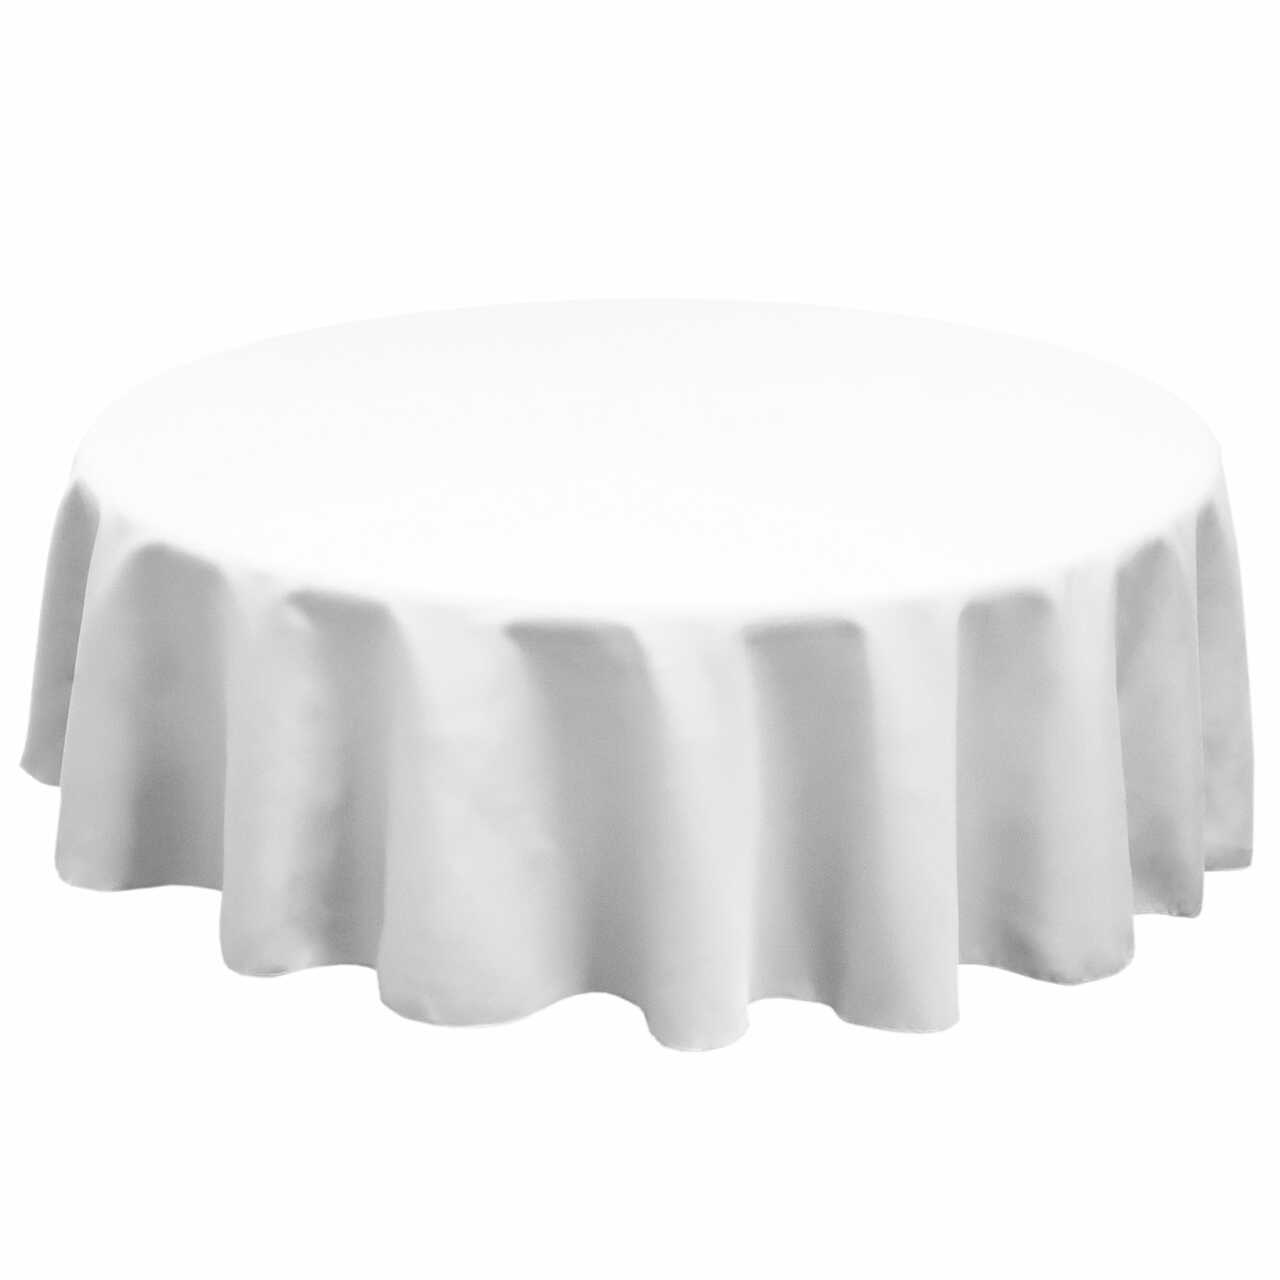 SimplyPoly Tablecloth